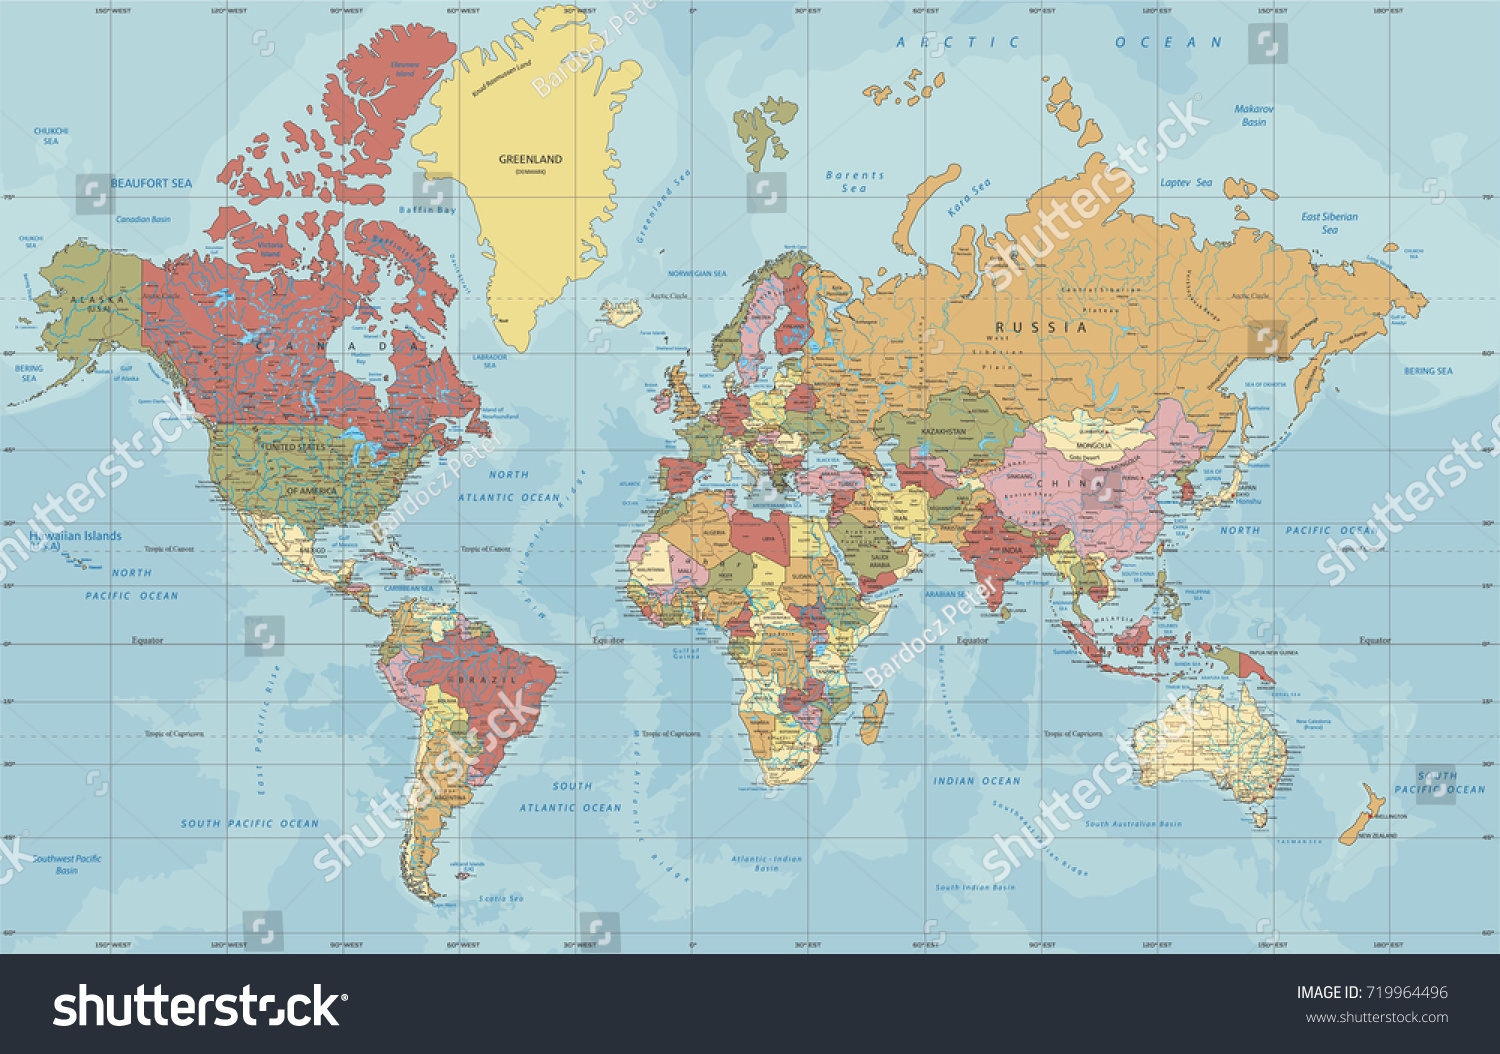 Detailed Political World Map In Mercator Royalty Free Stock Vector 719964496 0668